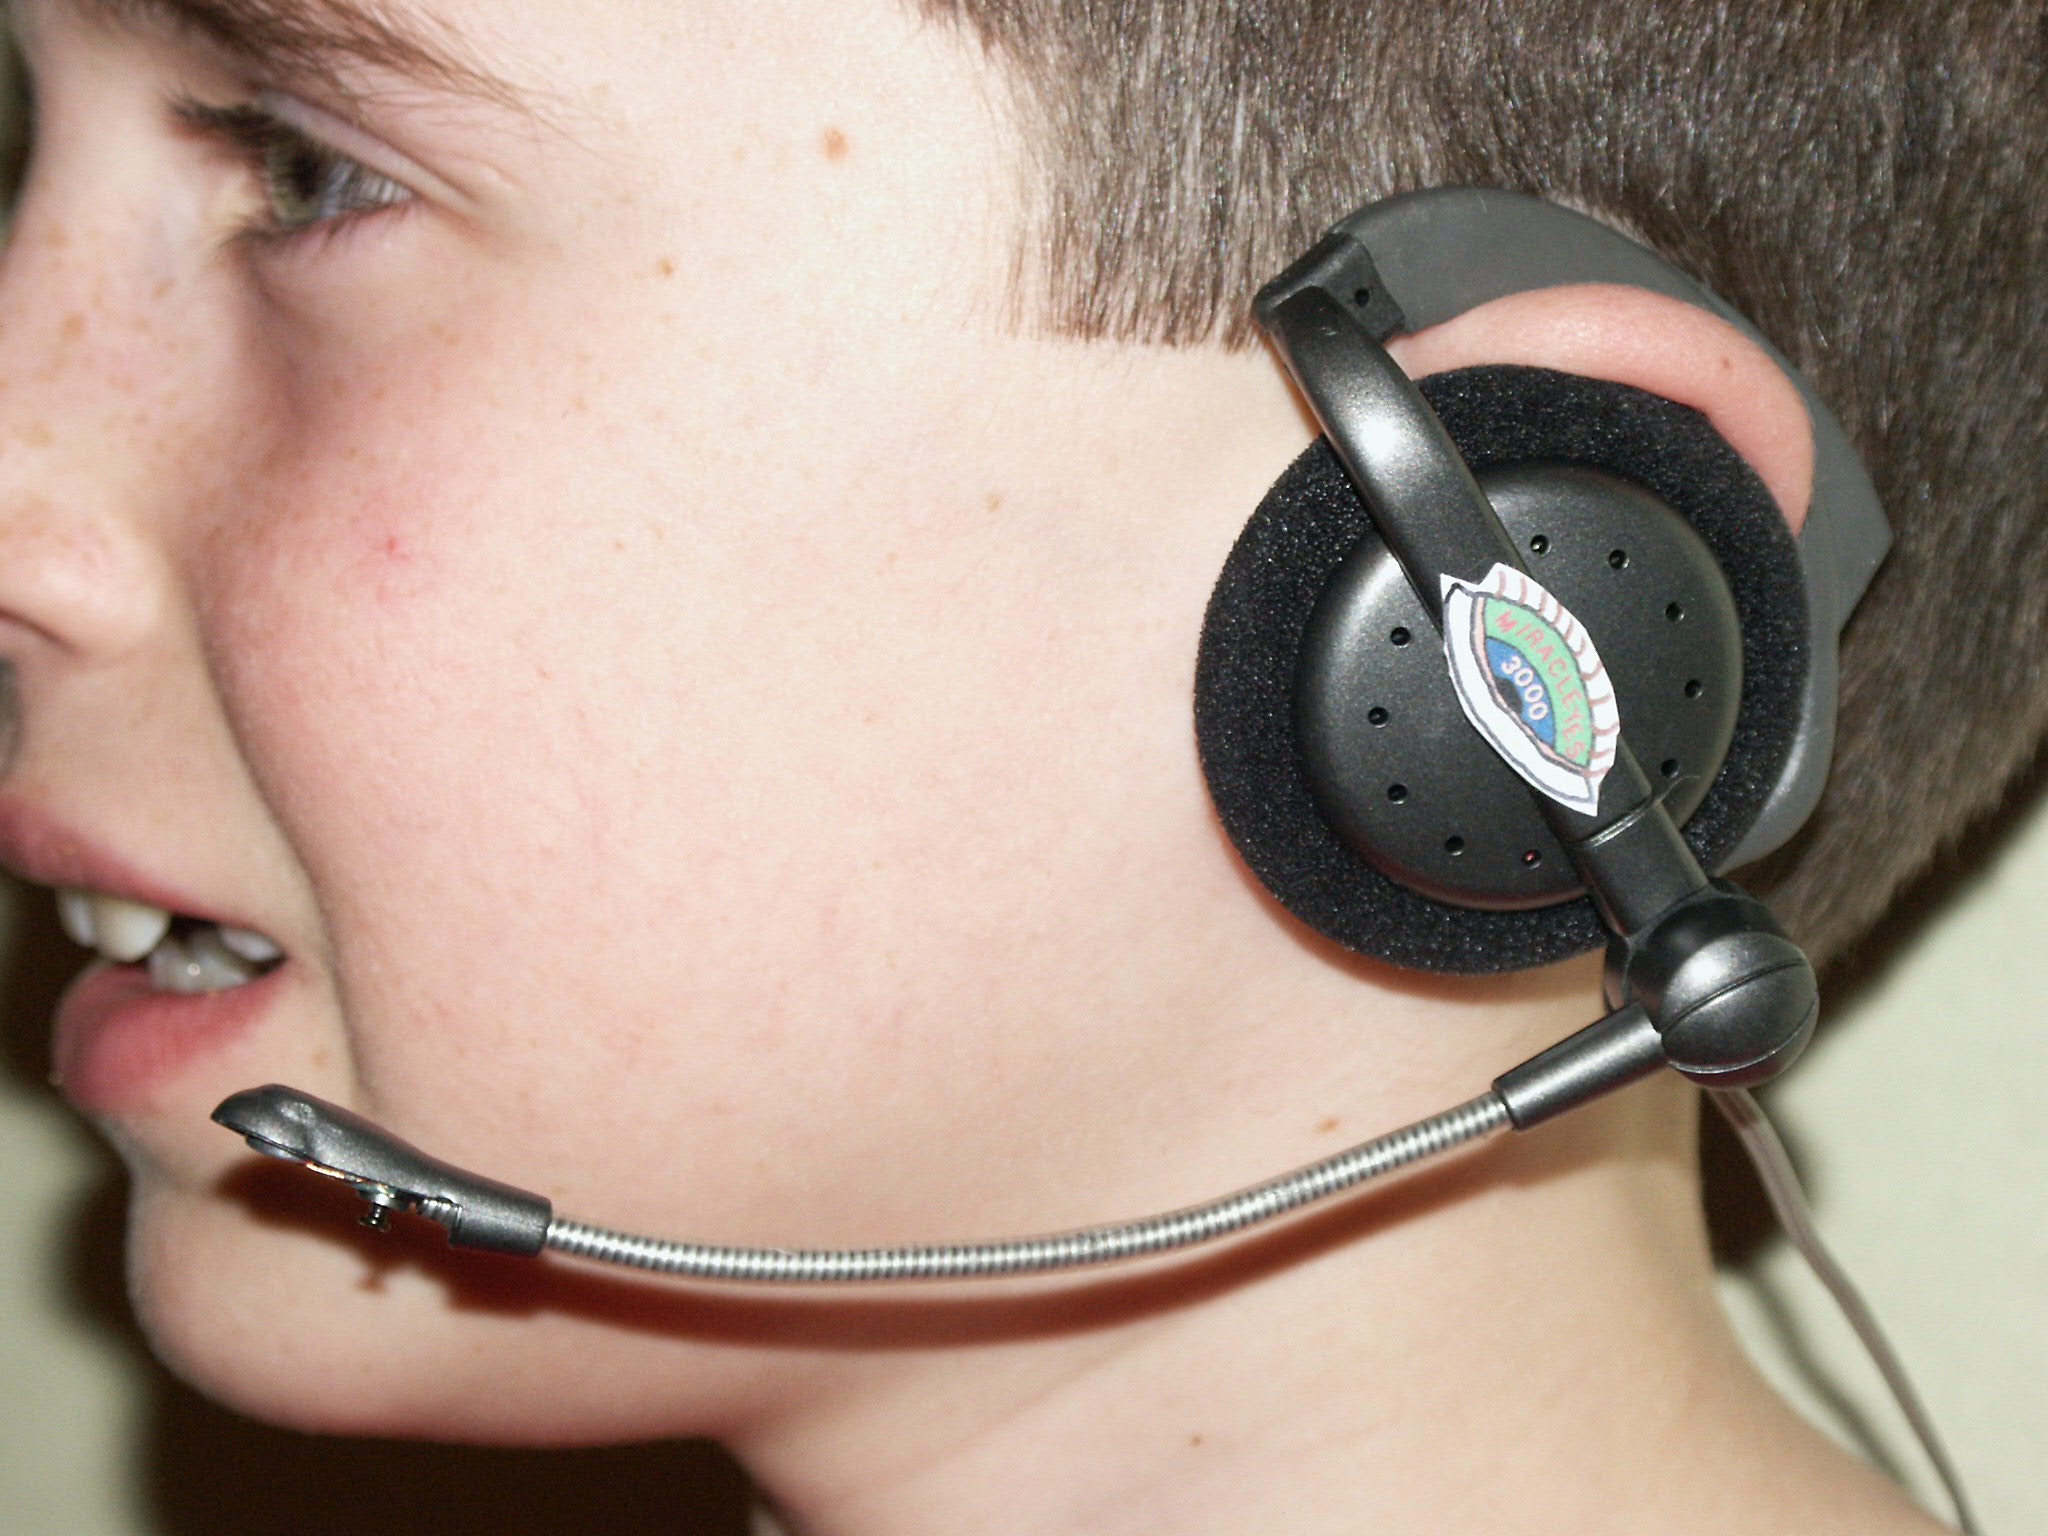 Photo of MiraclEyes earpiece and microphone on user's head.